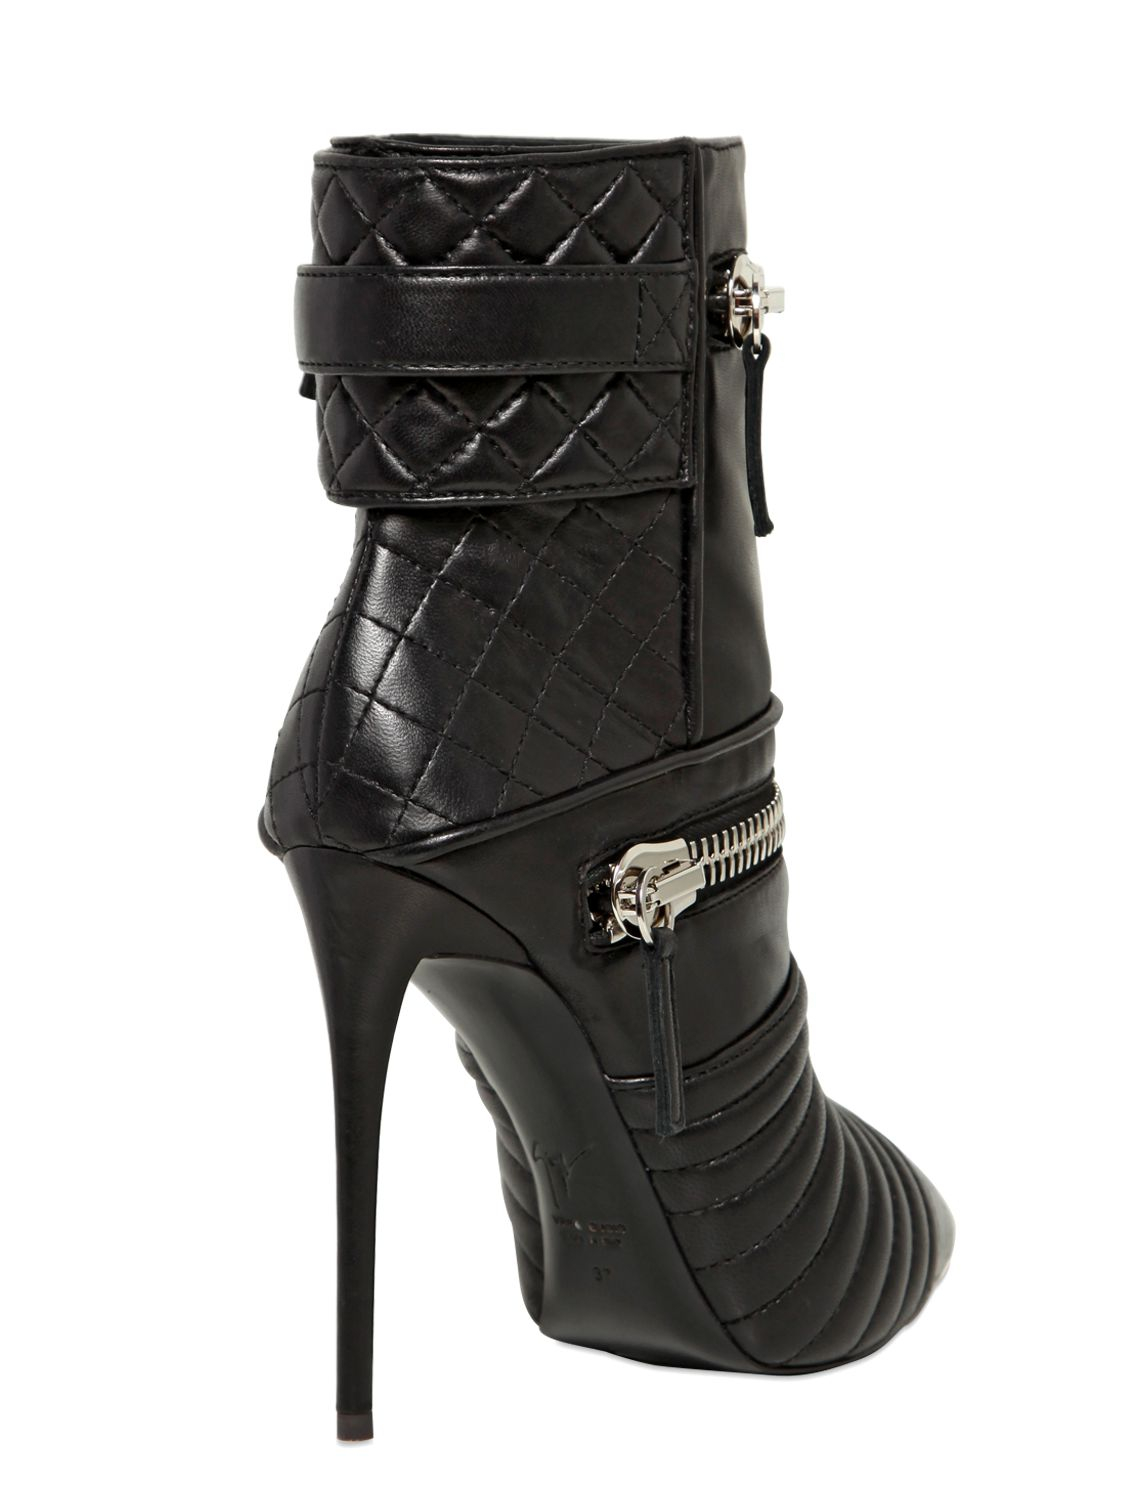 Lyst - Giuseppe Zanotti 110Mm Quilted Zipped Calf Ankle Boots in Black